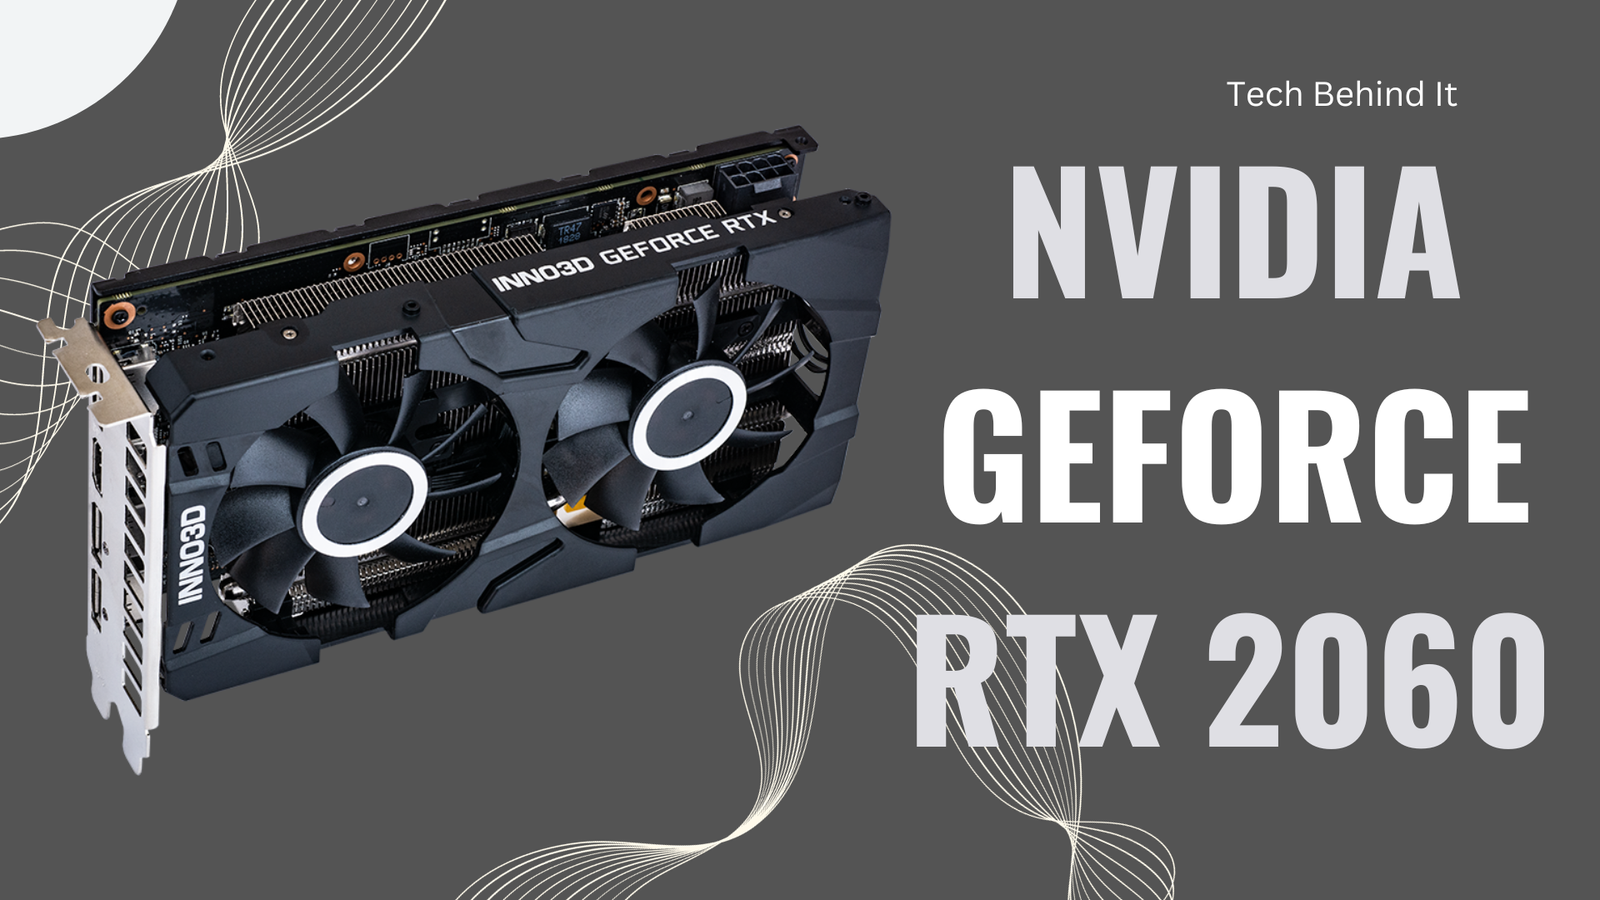 Nvidia GeForce RTX 2060 Laptop GPU Review: Power and Portability